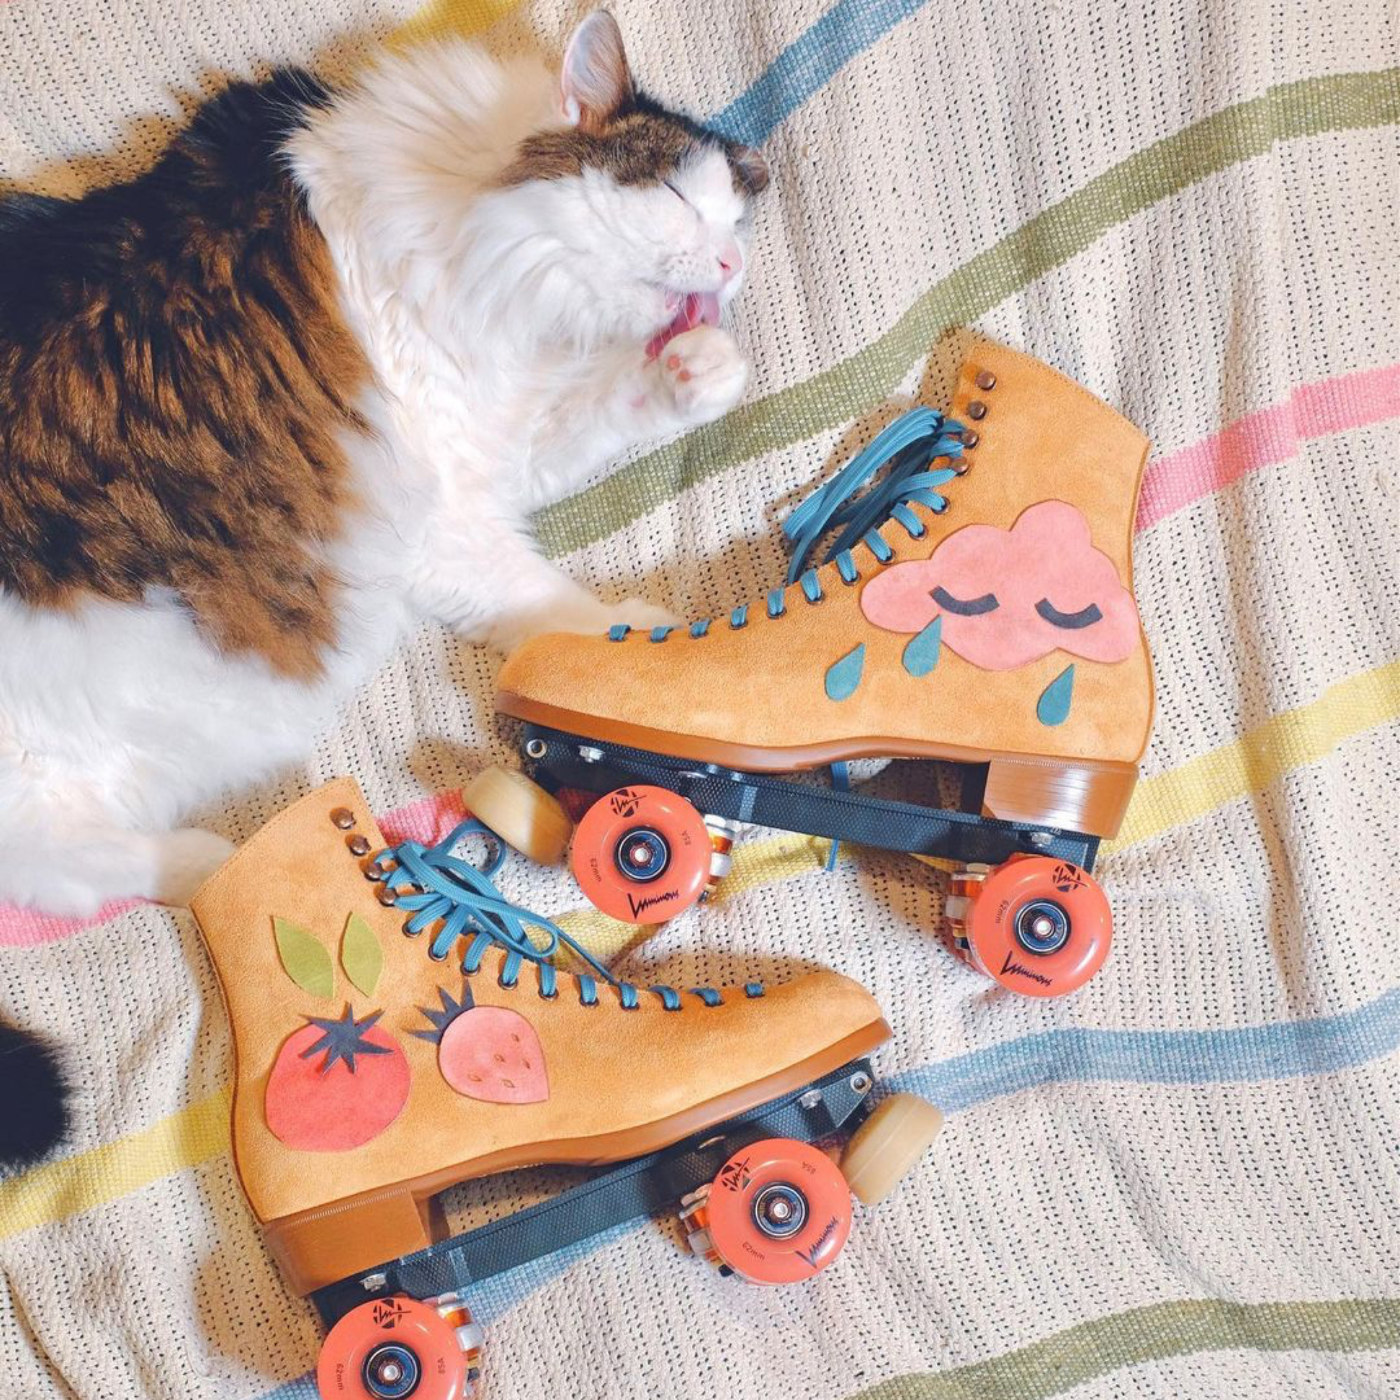 Light orange roller skates with blue laces and dark orange wheels lay on a cream blanket with green, pink, yellow and blue stripes. A white cat with brown accents lays to the top left of the skates licking its front left paw. On the roller skates, small pieces of paper have been cut out and stuck to them. A red tomato, pink strawberry and two leaves are on the skate to the left and a pink cloud with three rain drops coming from it and two small lines representing closed downcast eyes are on the skate to the right.